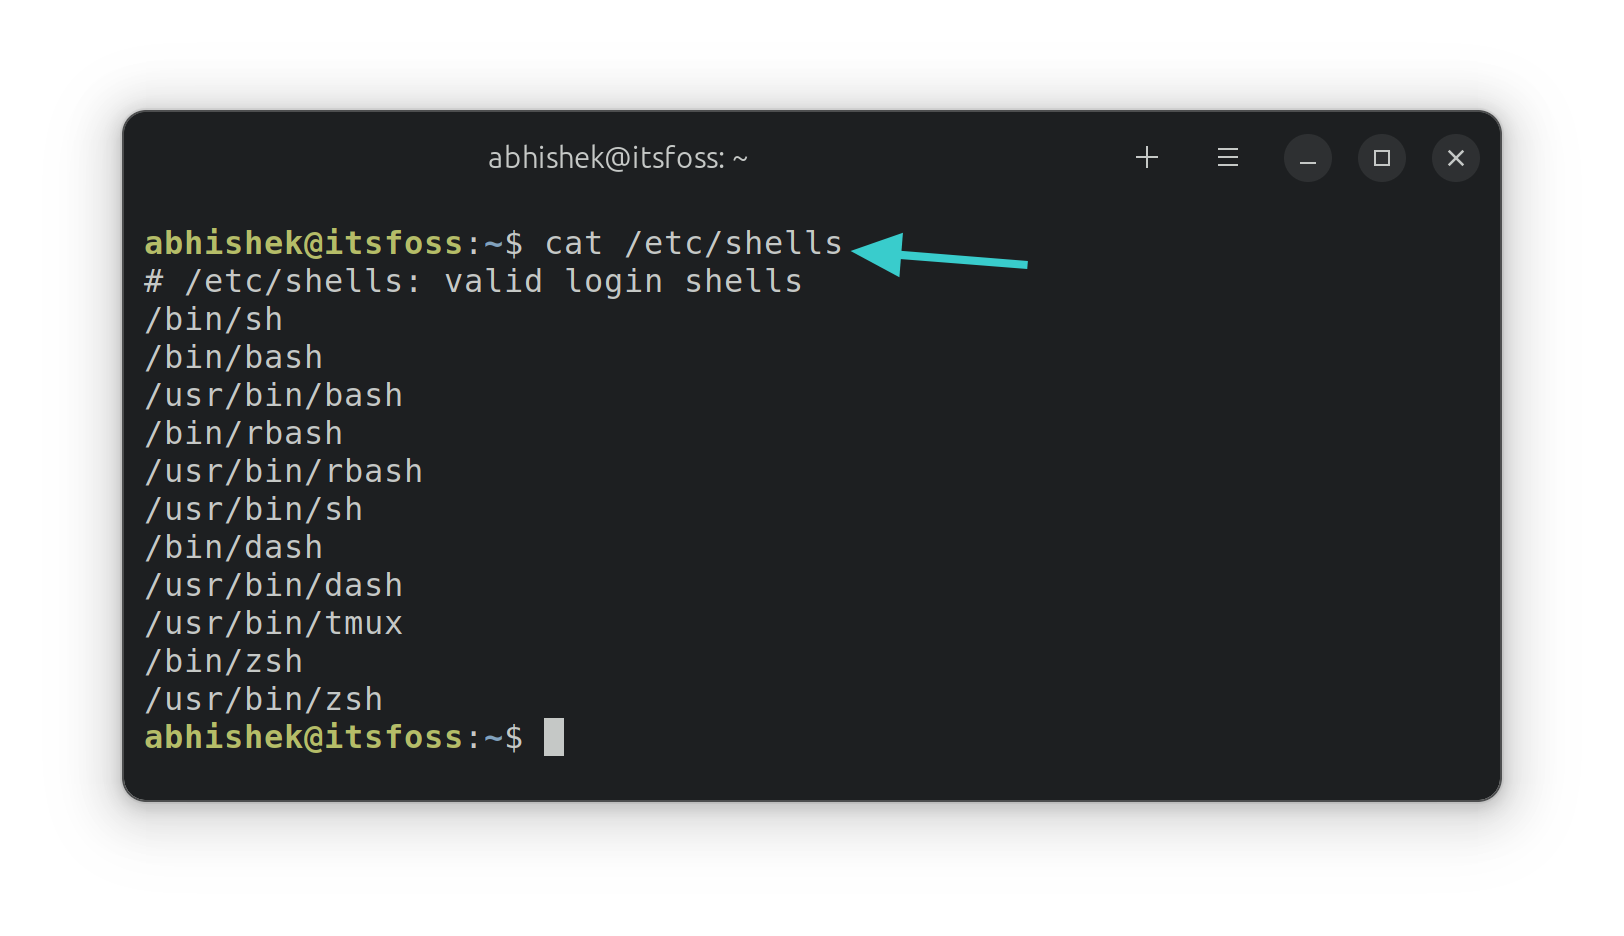 Available shells in Linux